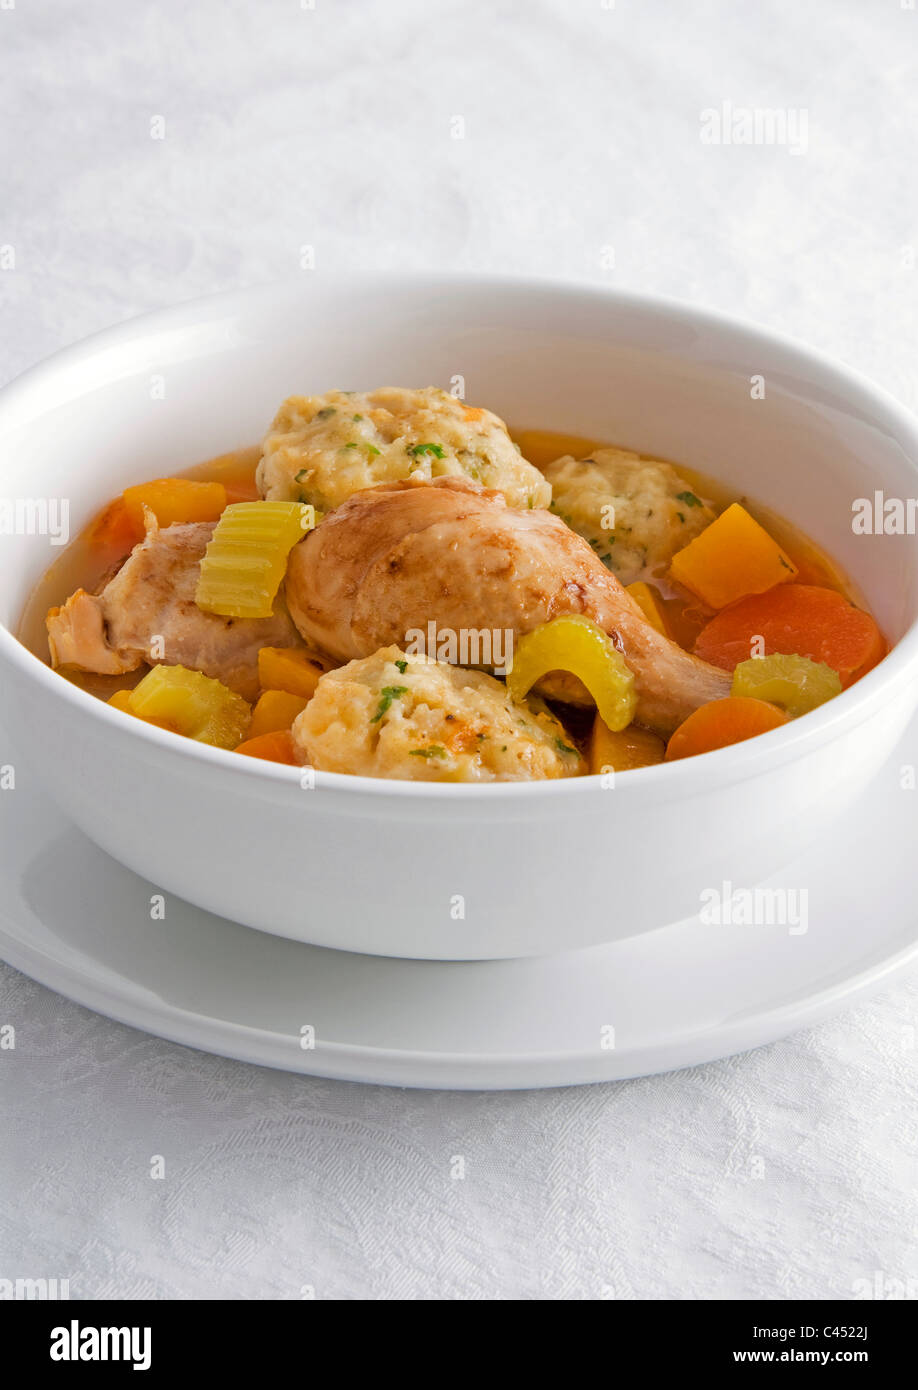 Chicken herb dumplings in bowl, close-up Stock Photo